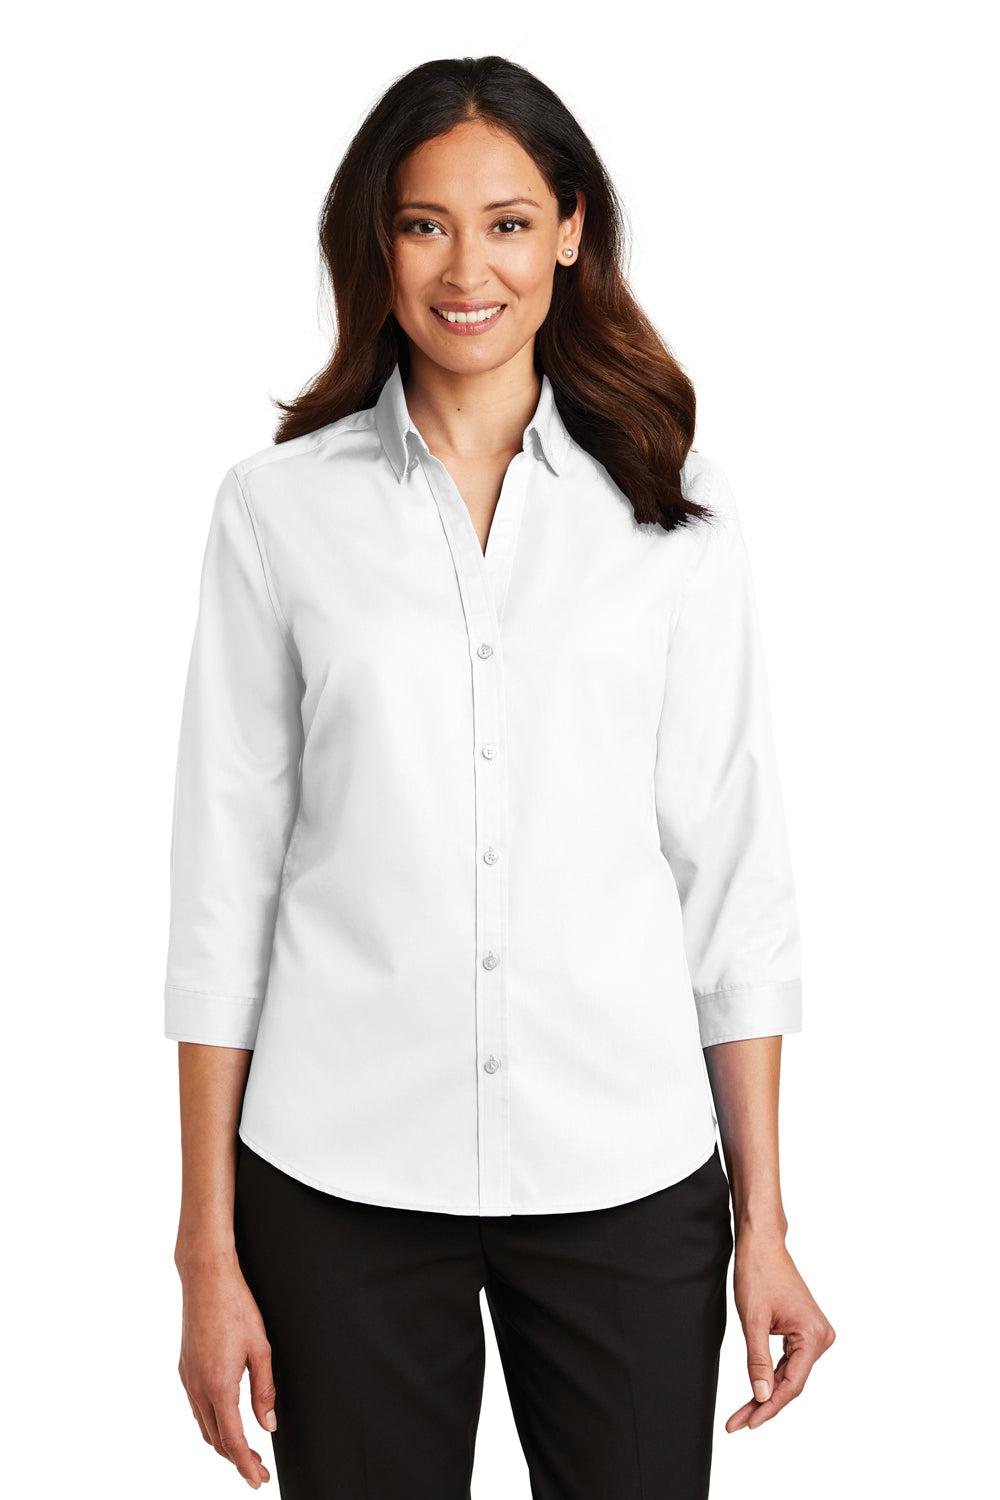 Port Authority L665 Womens SuperPro Wrinkle Resistant 3/4 Sleeve Button Down Shirt White Front